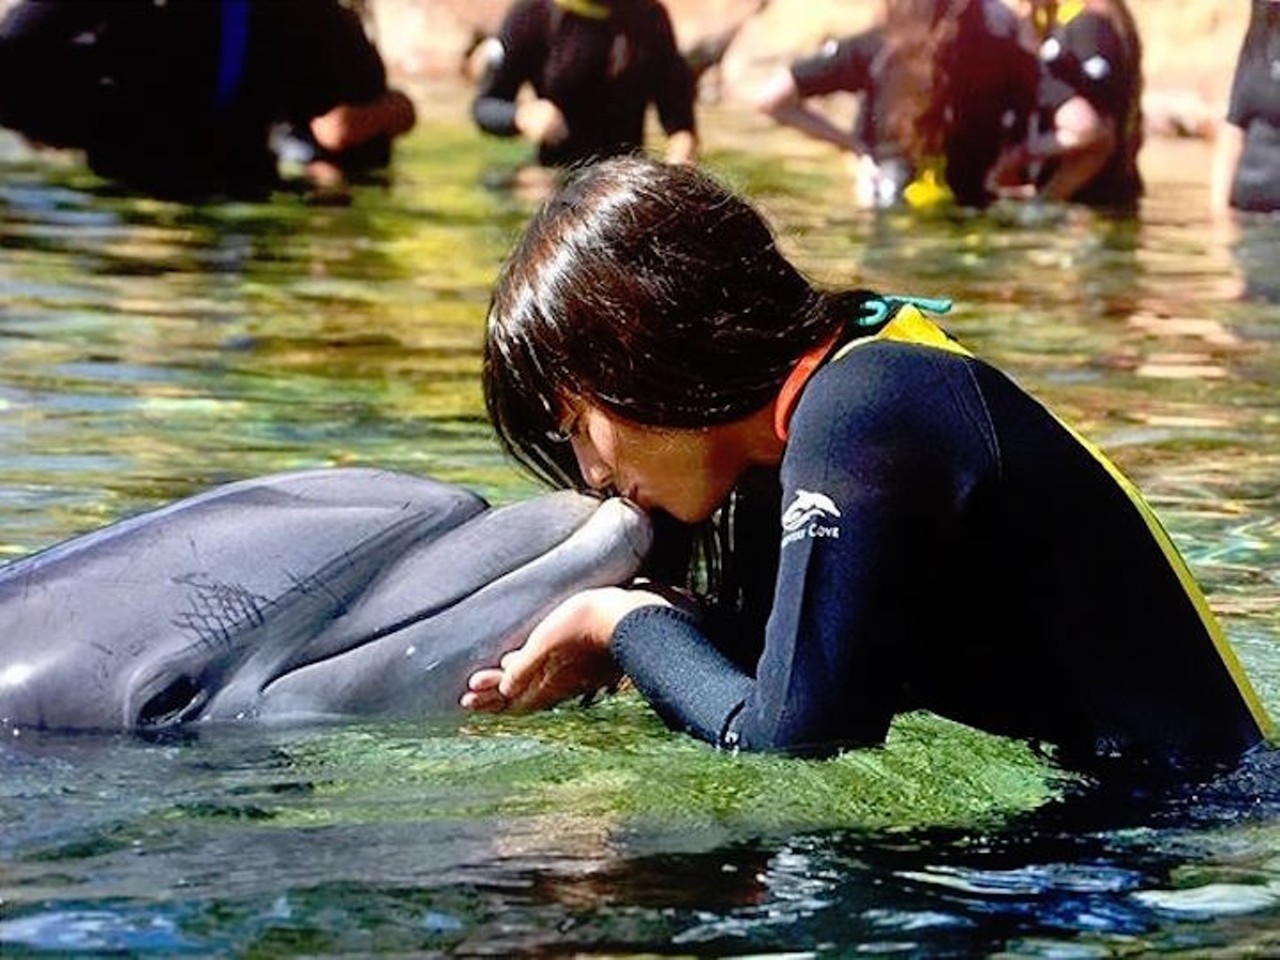 6. Lay a kiss on a dolphin (or your date) at Discovery Cove
You'll probably smell like fish later, but hey, at least you got to kiss a cute mammal. 
Photo via candee_arias/Instagram